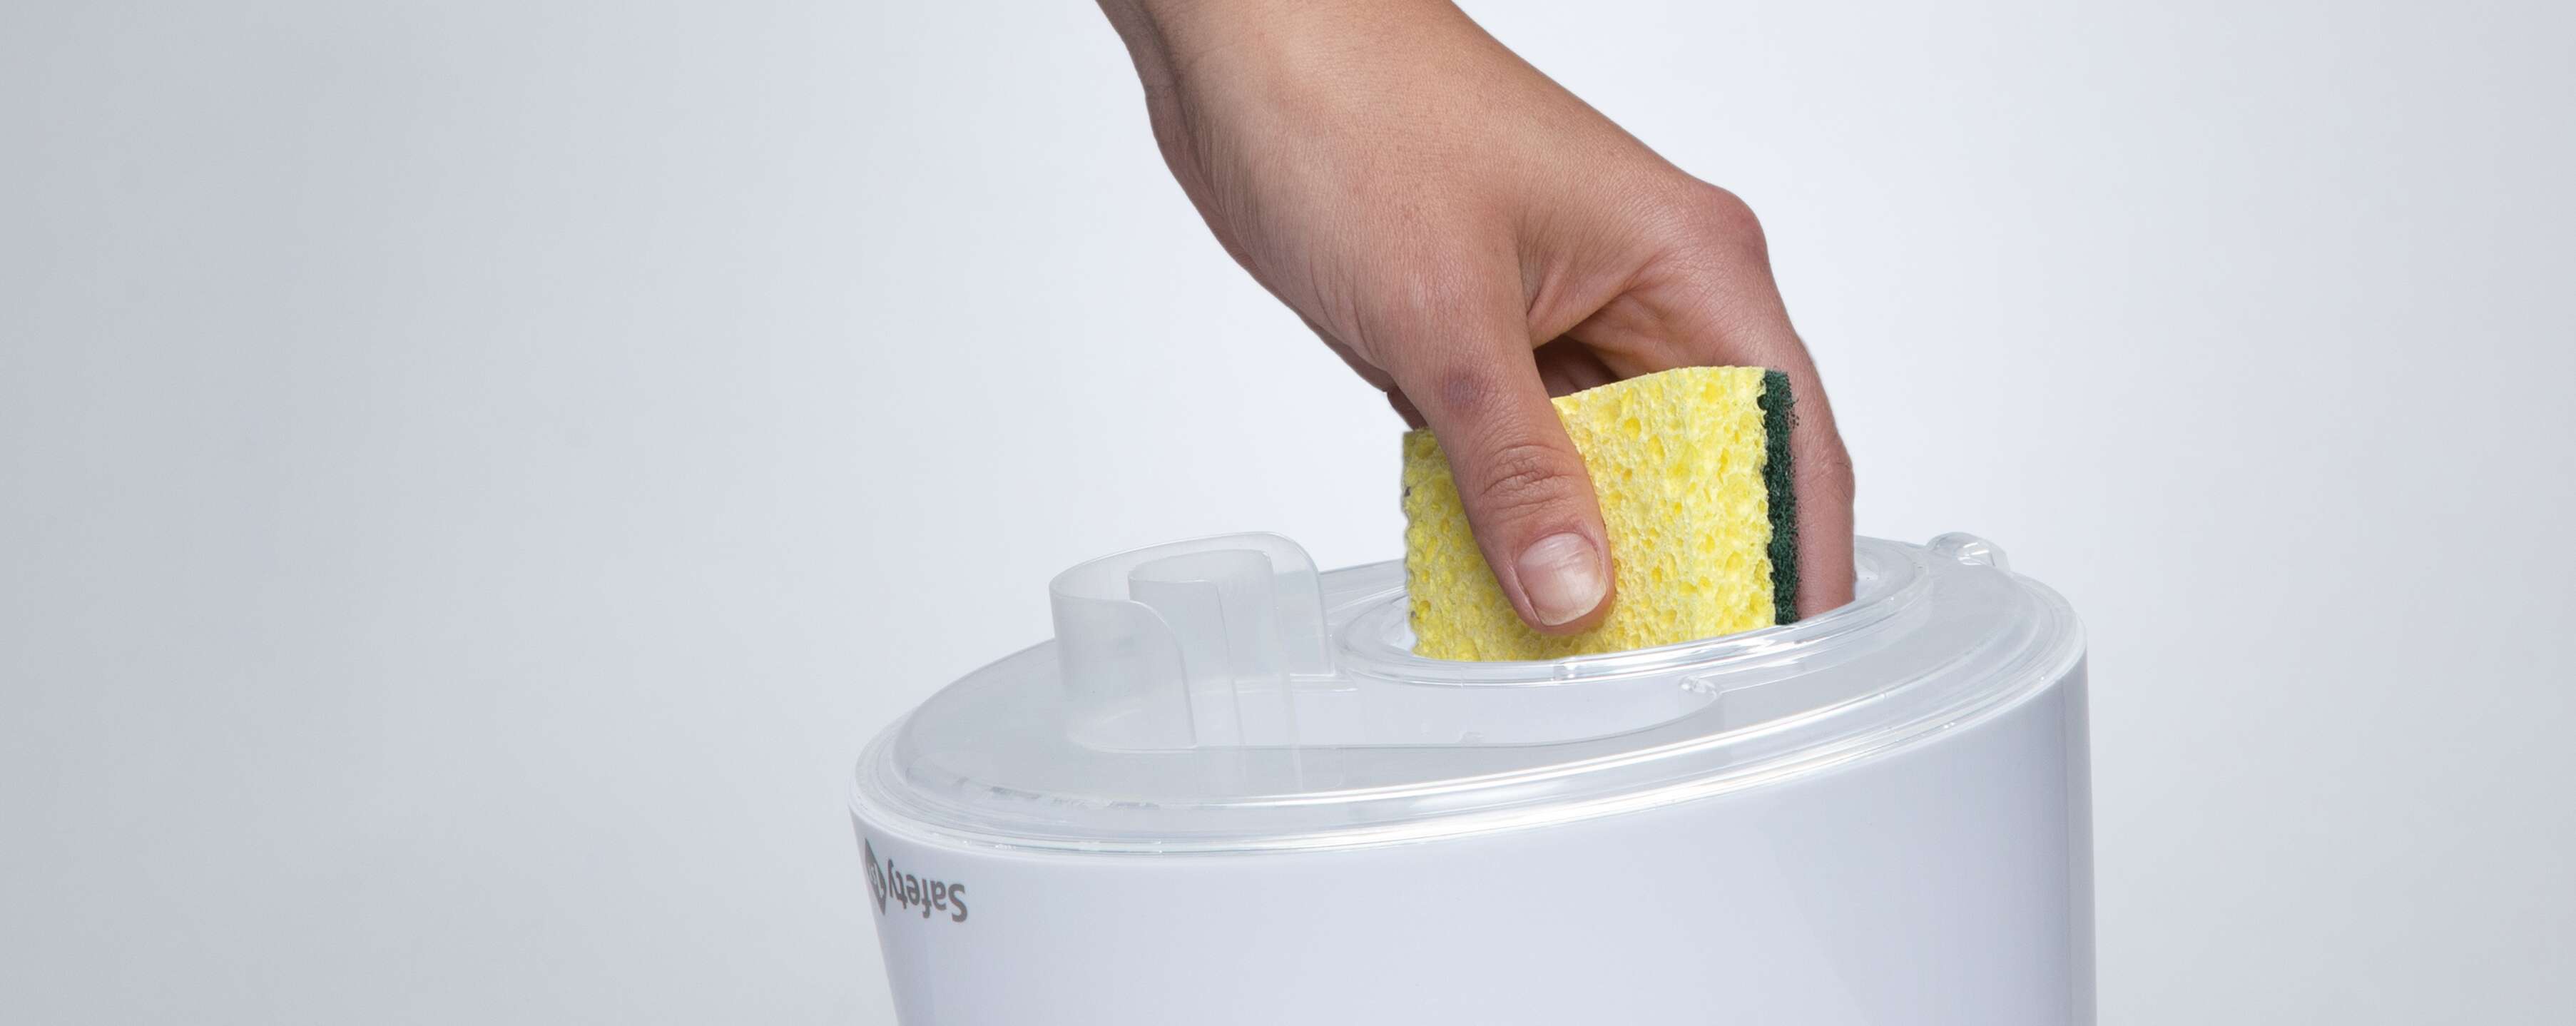 cleaning humidifier with sponge